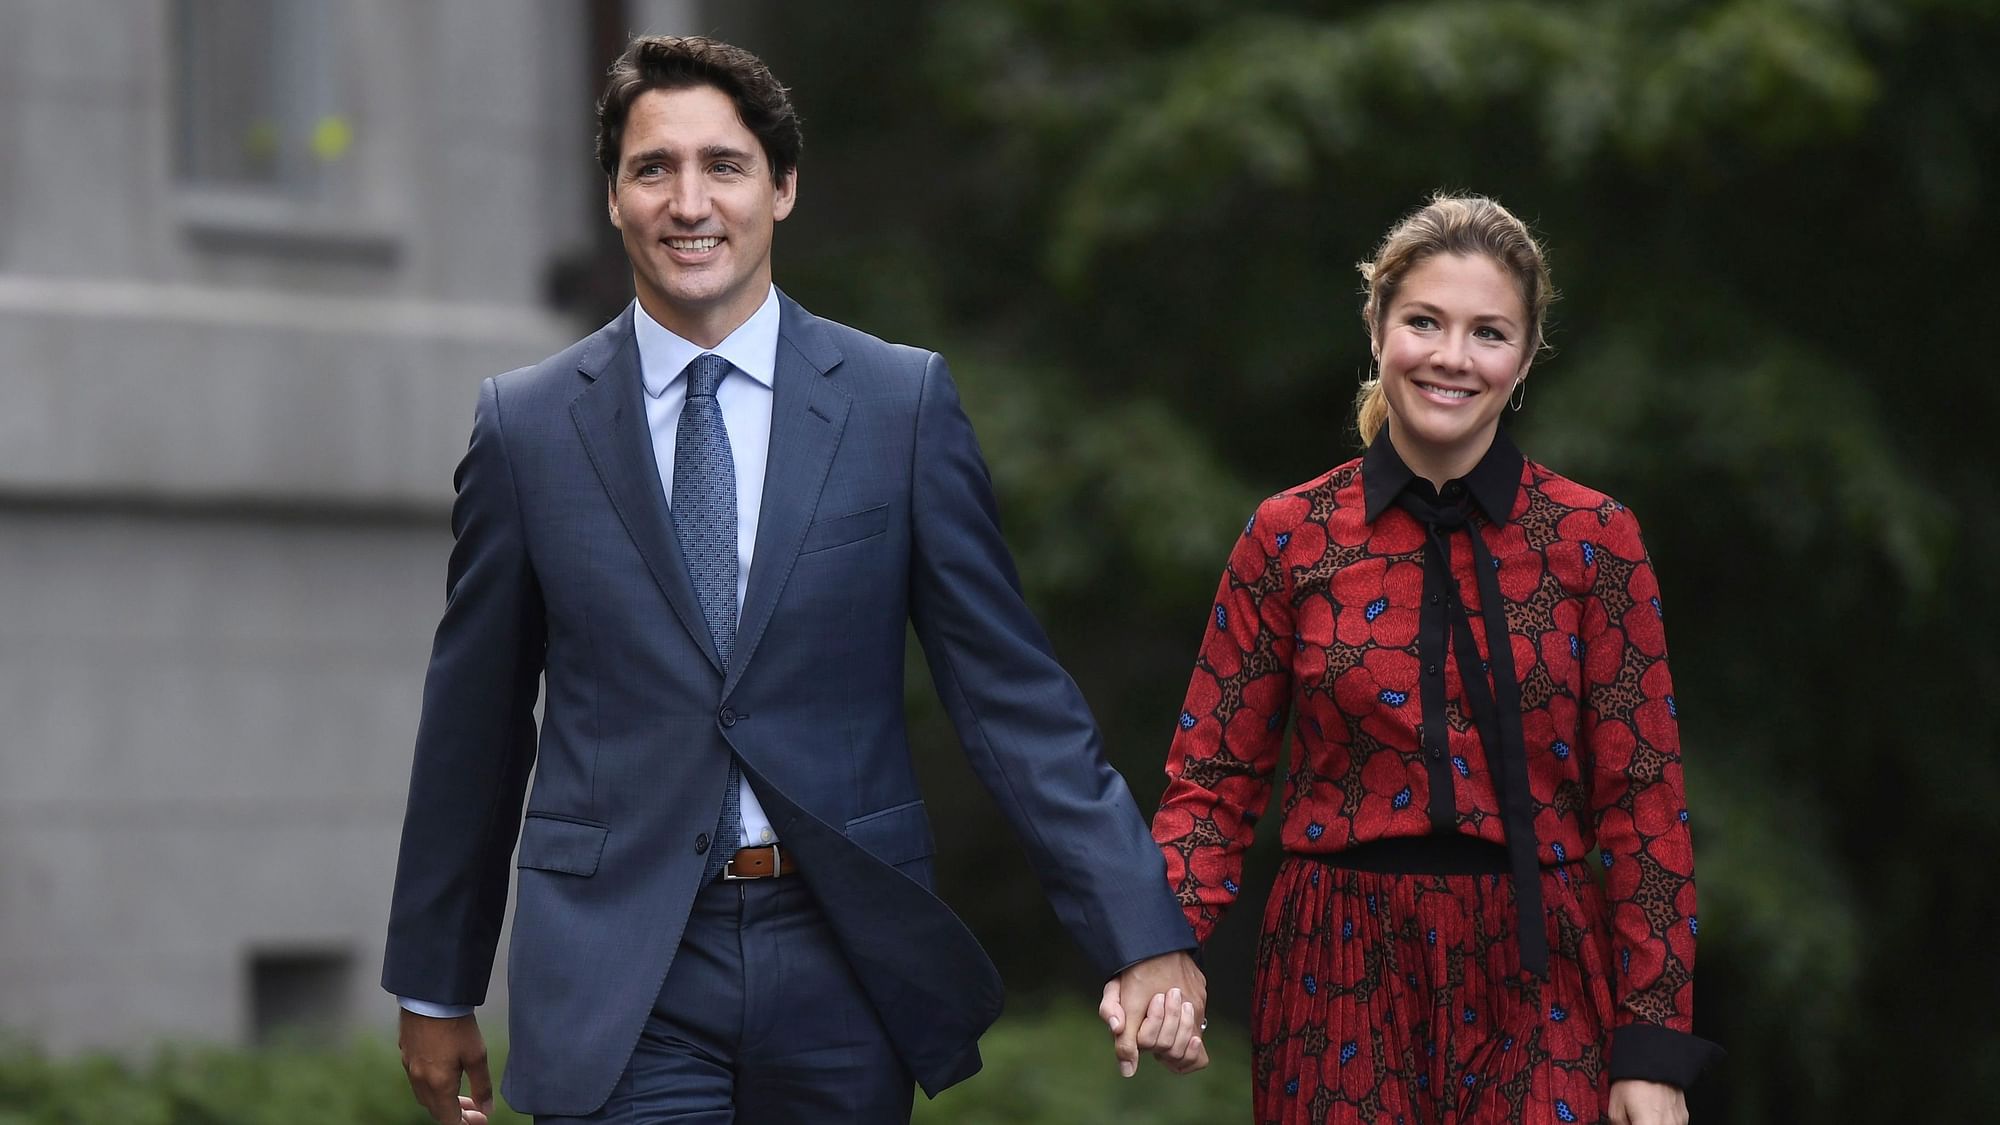 Canadian Prime Minister Justin Trudeau along with his wife Sophie Grégoire Trudeau.